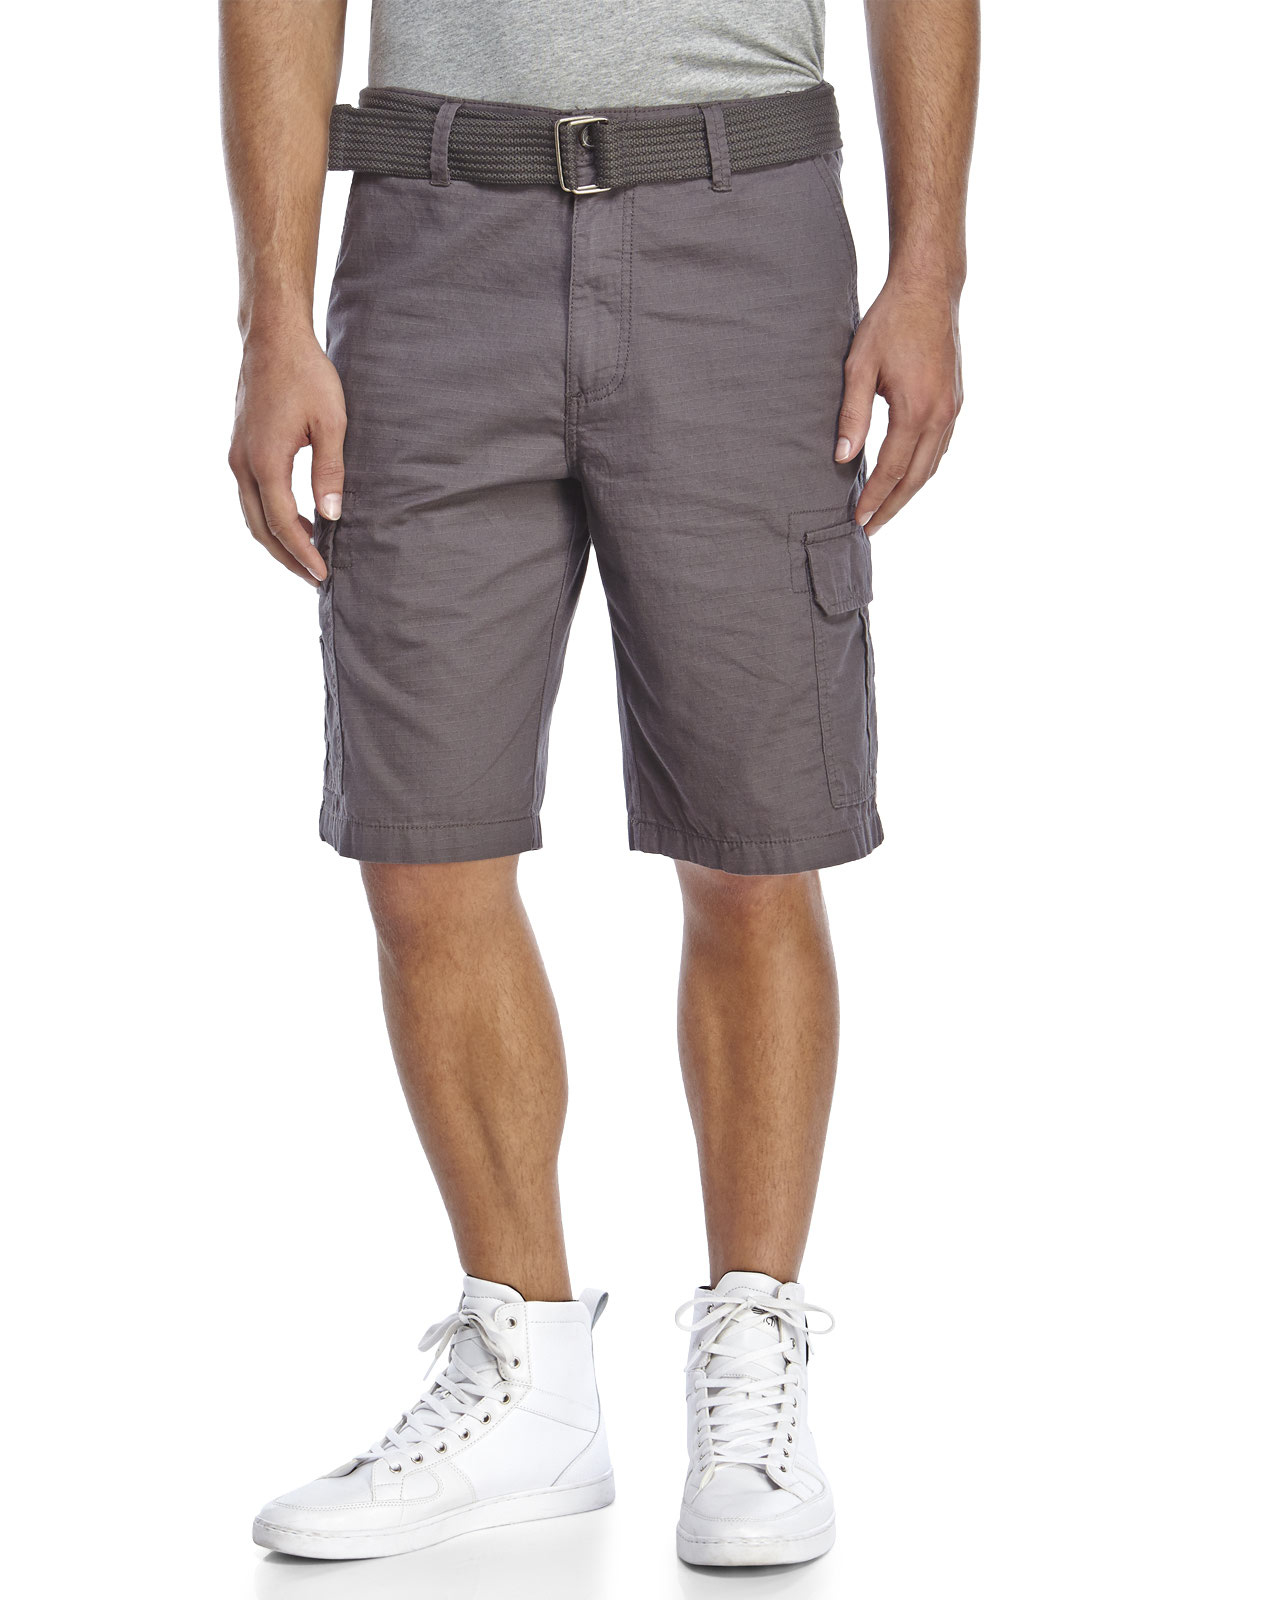 Lyst - Weatherproof Ripstop Belted Cargo Shorts in Gray for Men